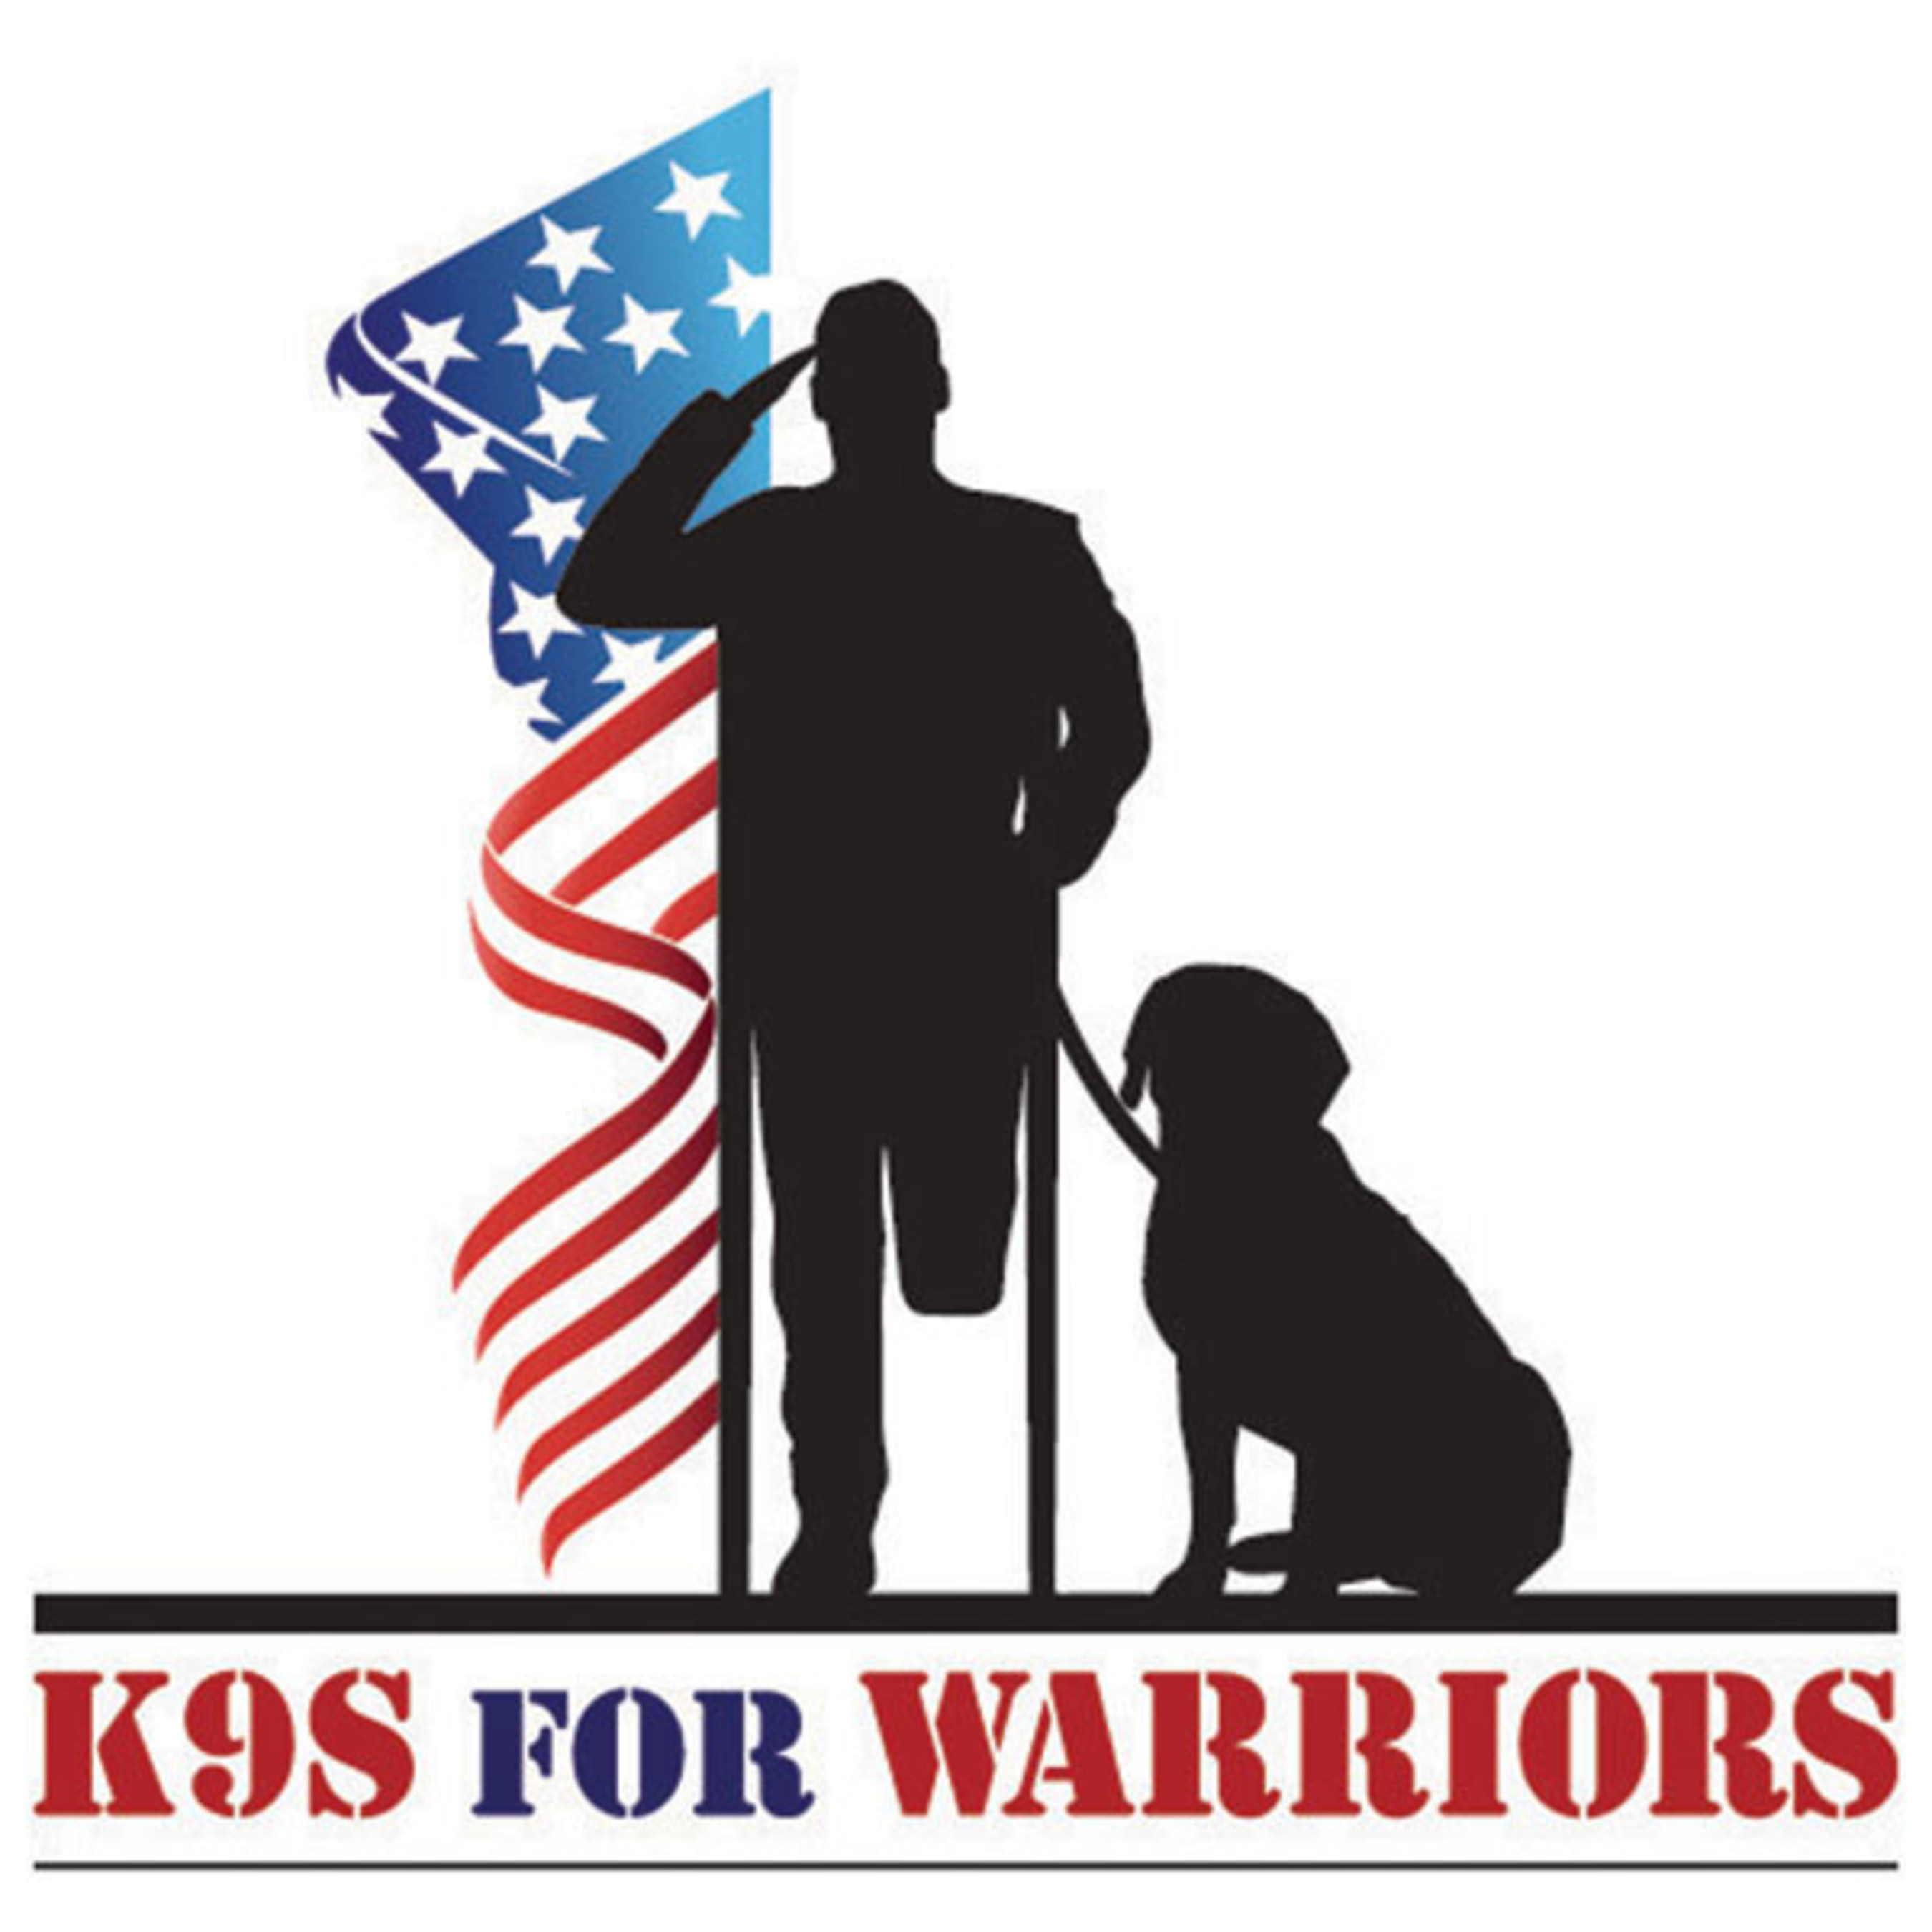 K9s For Warriors Announces Partnership With Merrick Pet Care To